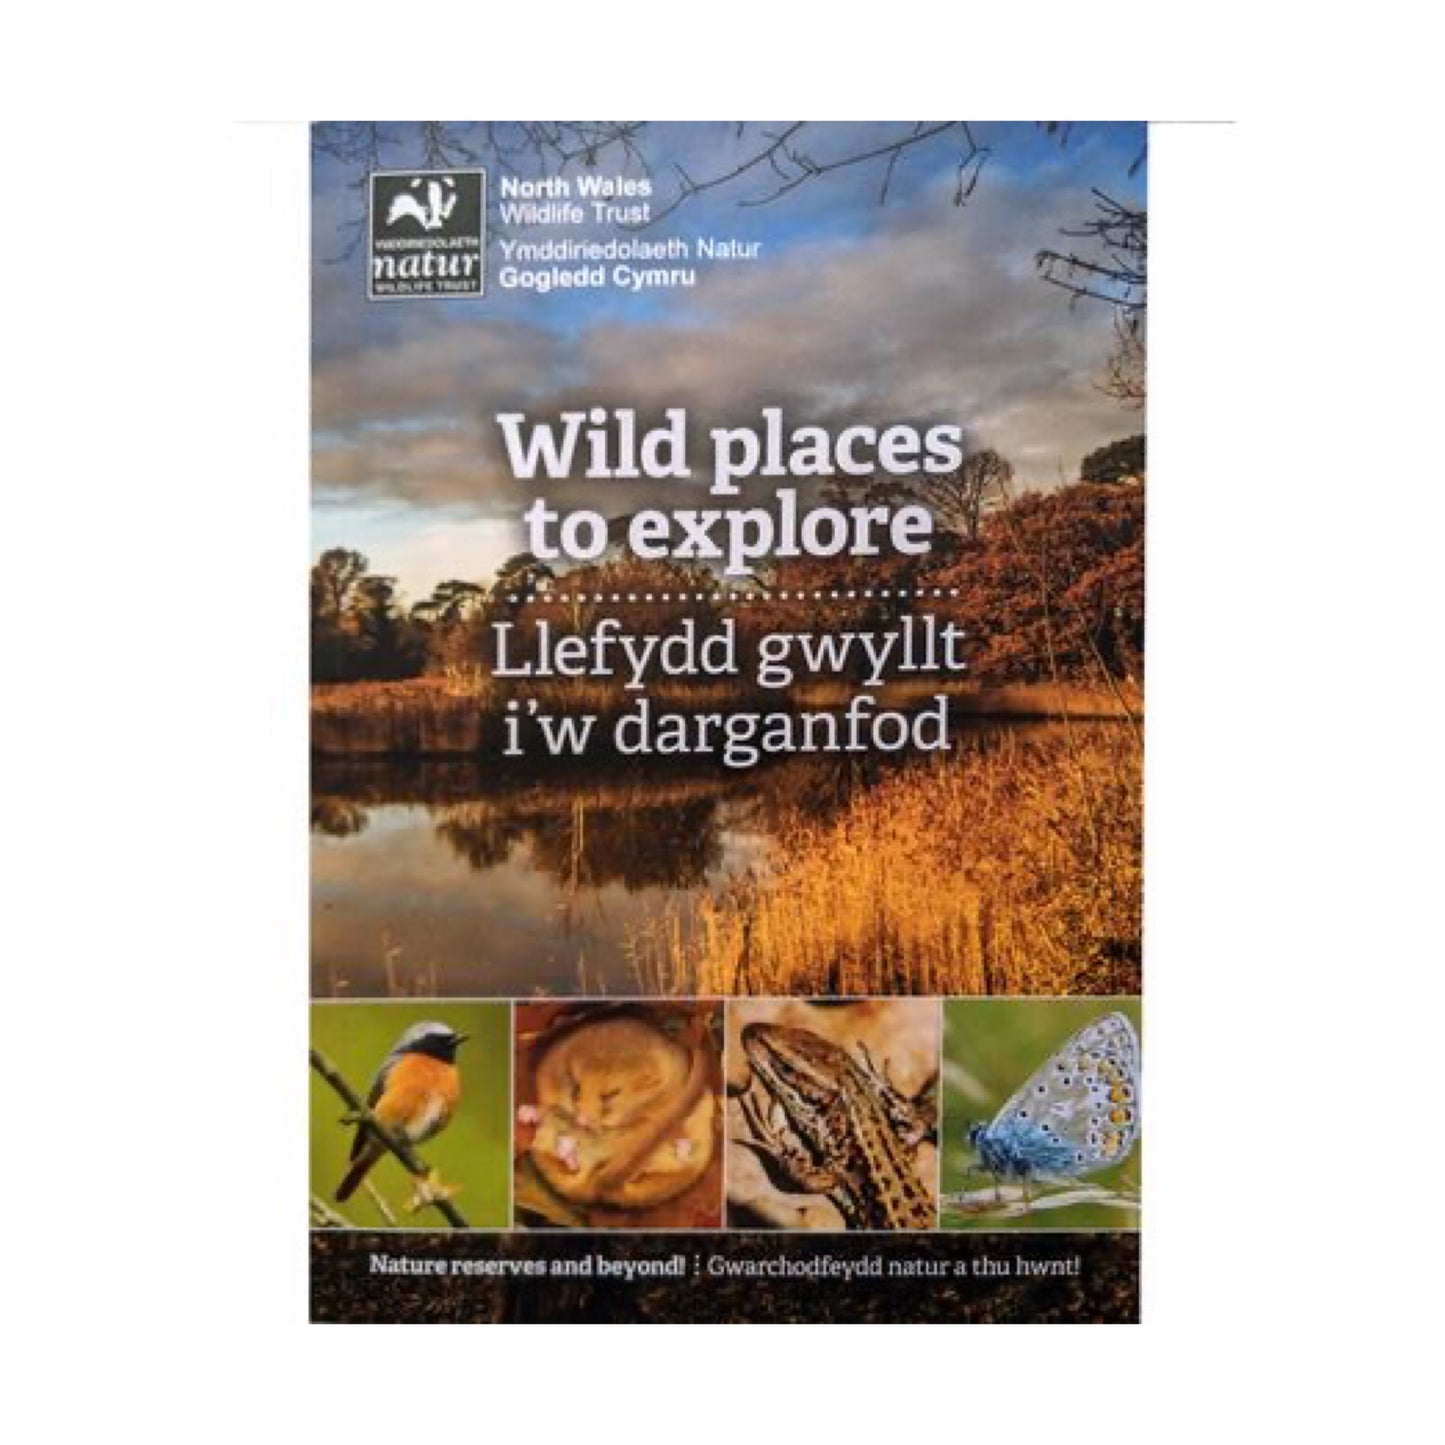 Wild Places to Explore - Choice of English or Welsh version